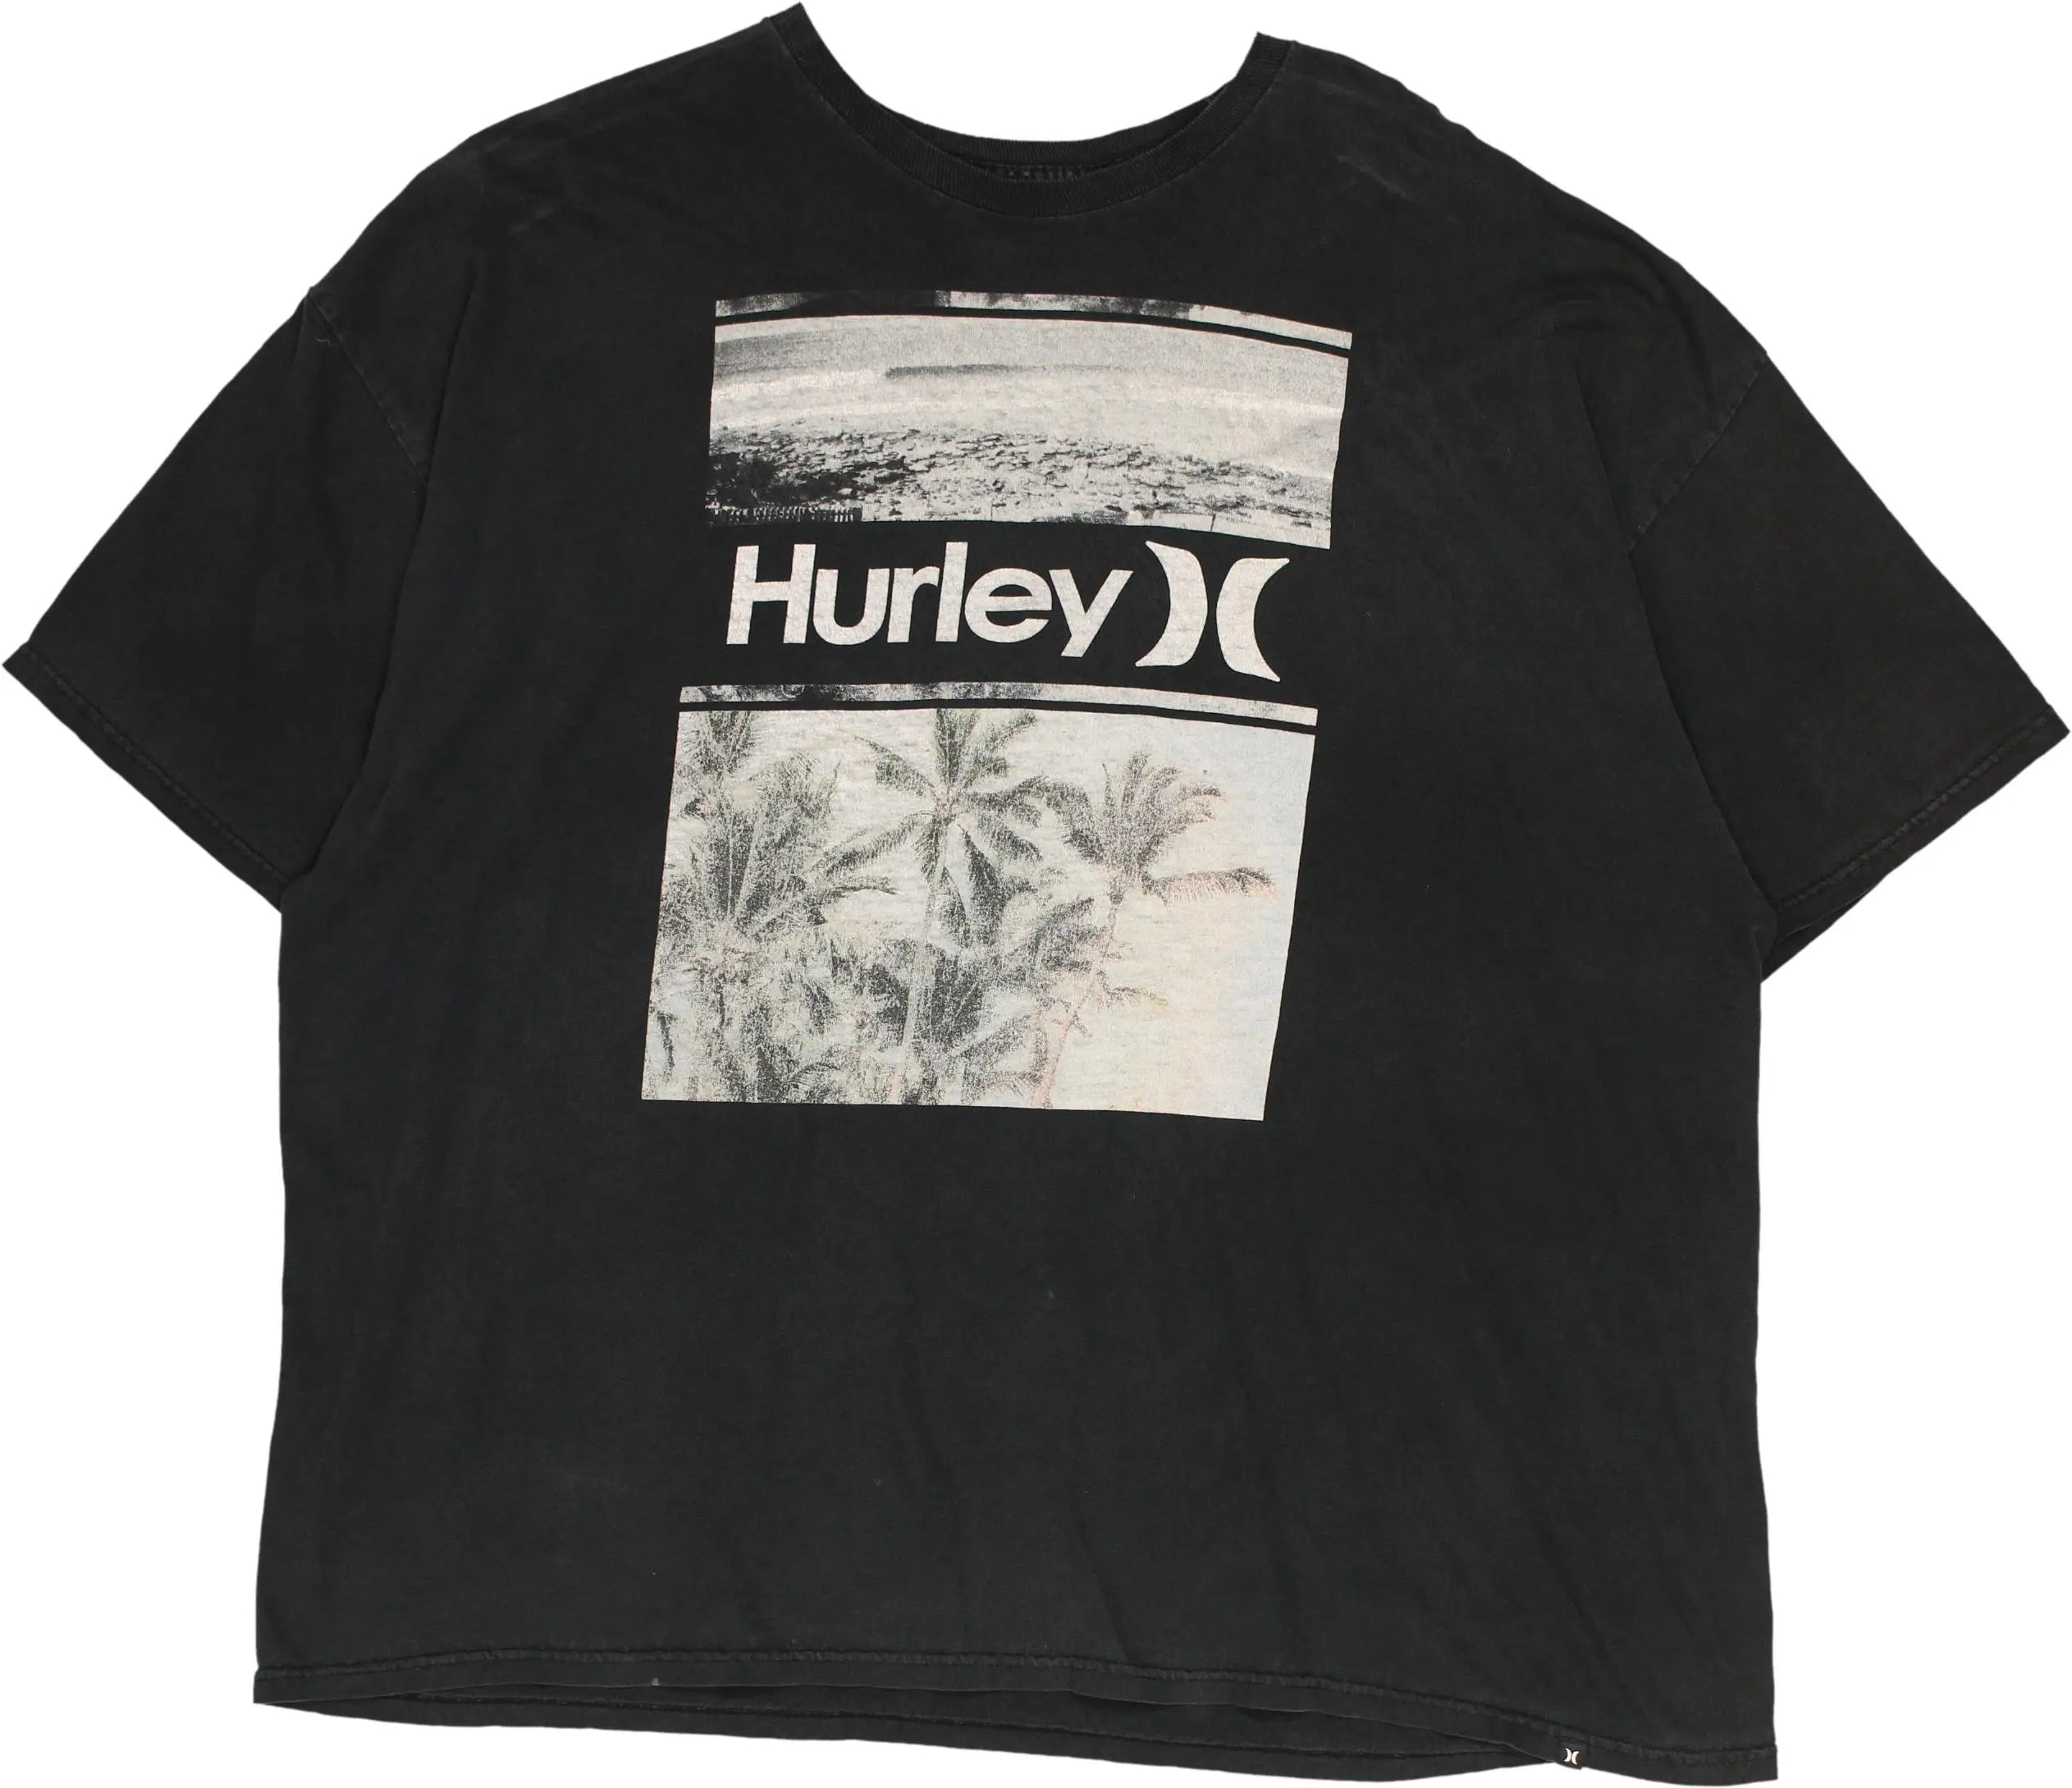 Hurley - T-shirt- ThriftTale.com - Vintage and second handclothing